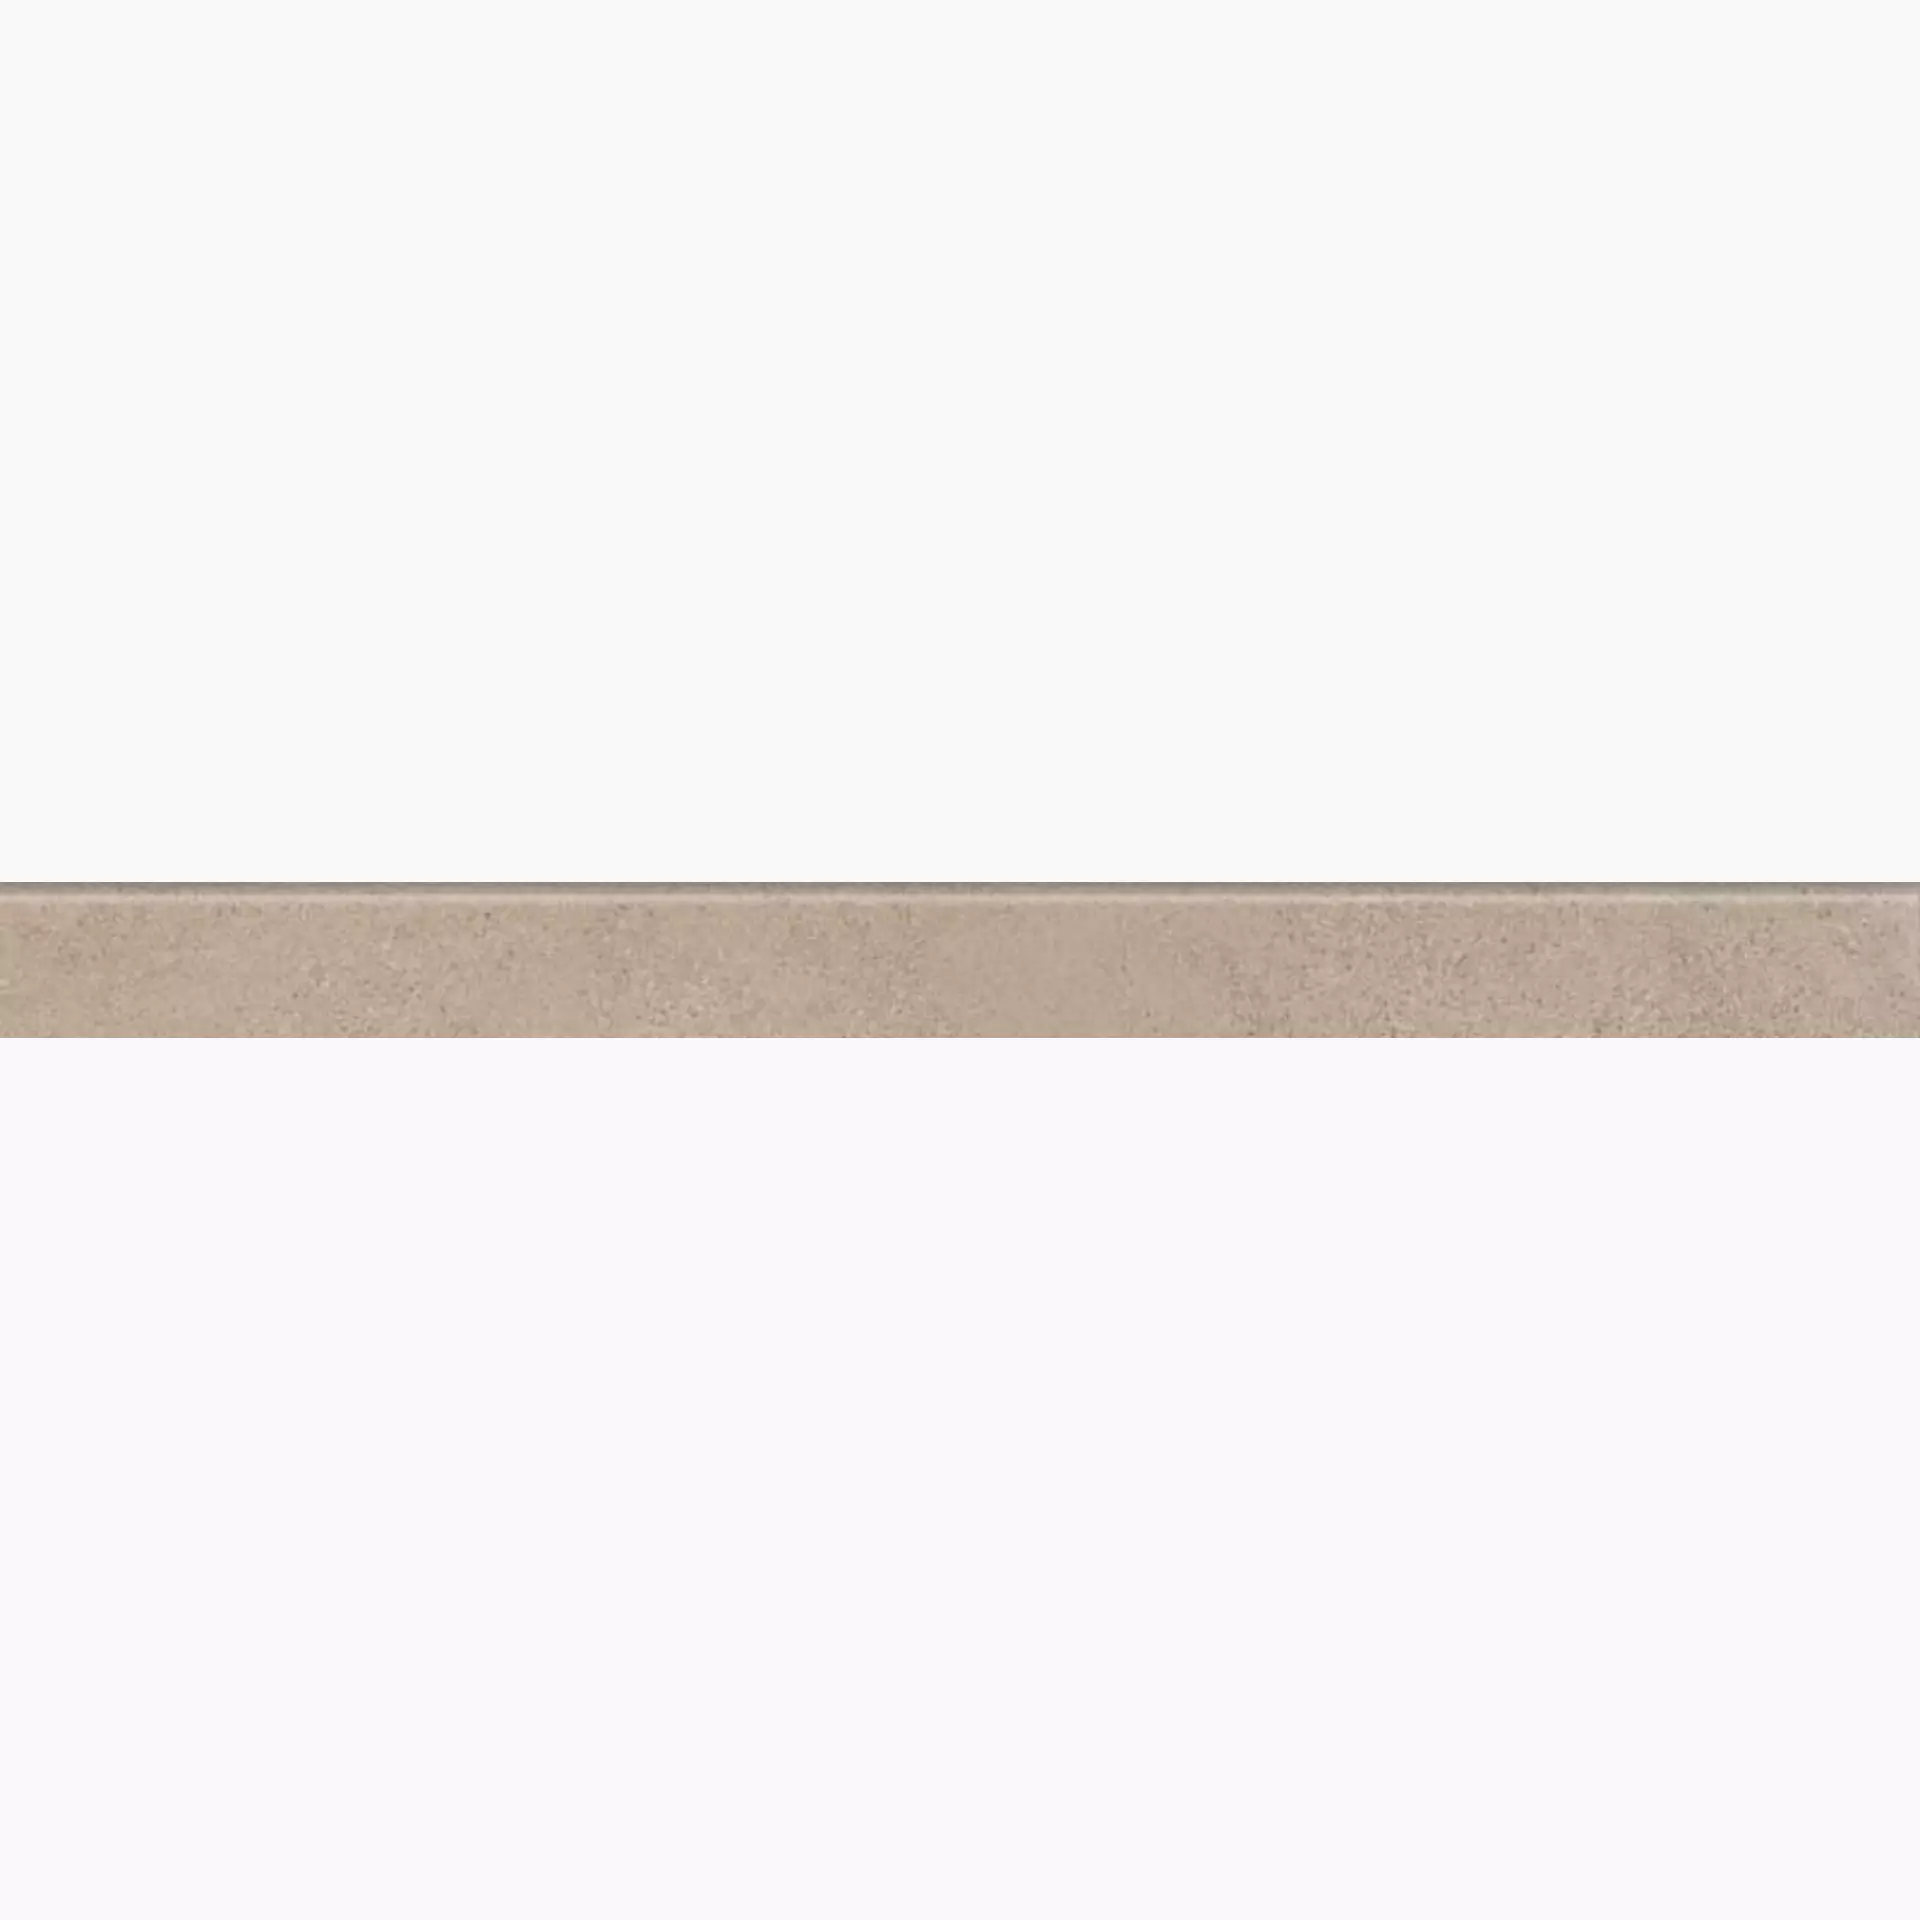 Sant Agostino Silkystone Taupe Natural Skirting board CSABTSTA90 7,3x90cm rectified 10mm